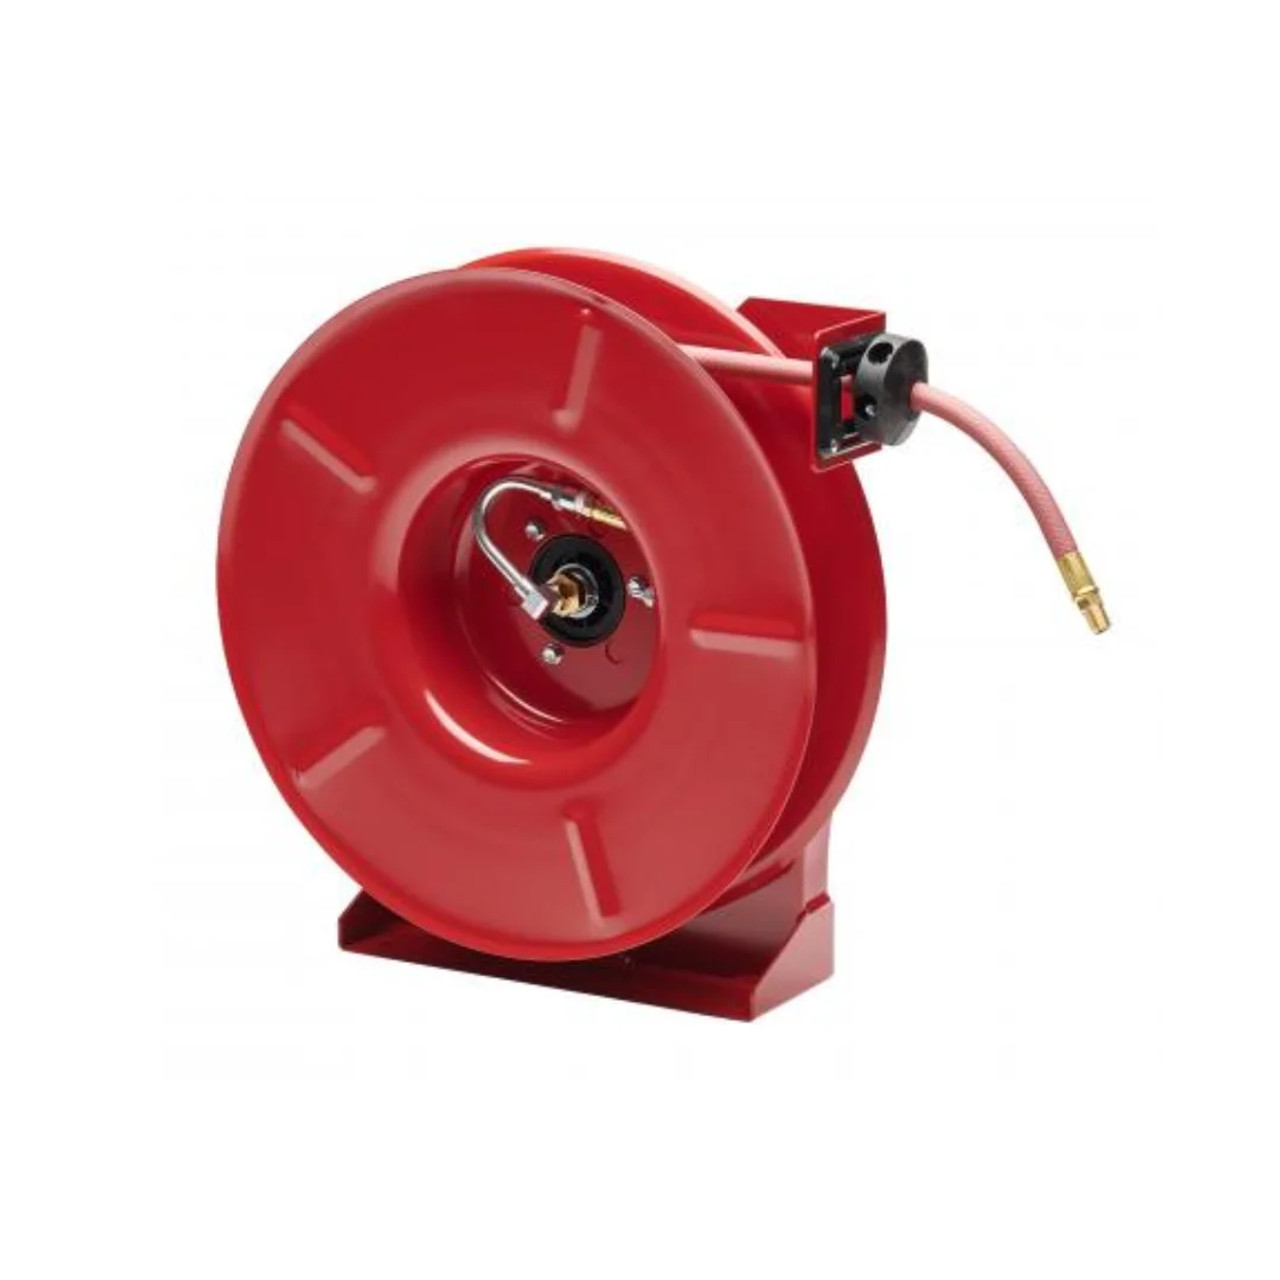 Reelcraft 5650 Olp Air/Water With Hose, 300 Psi Hose Reel, 3/8 X